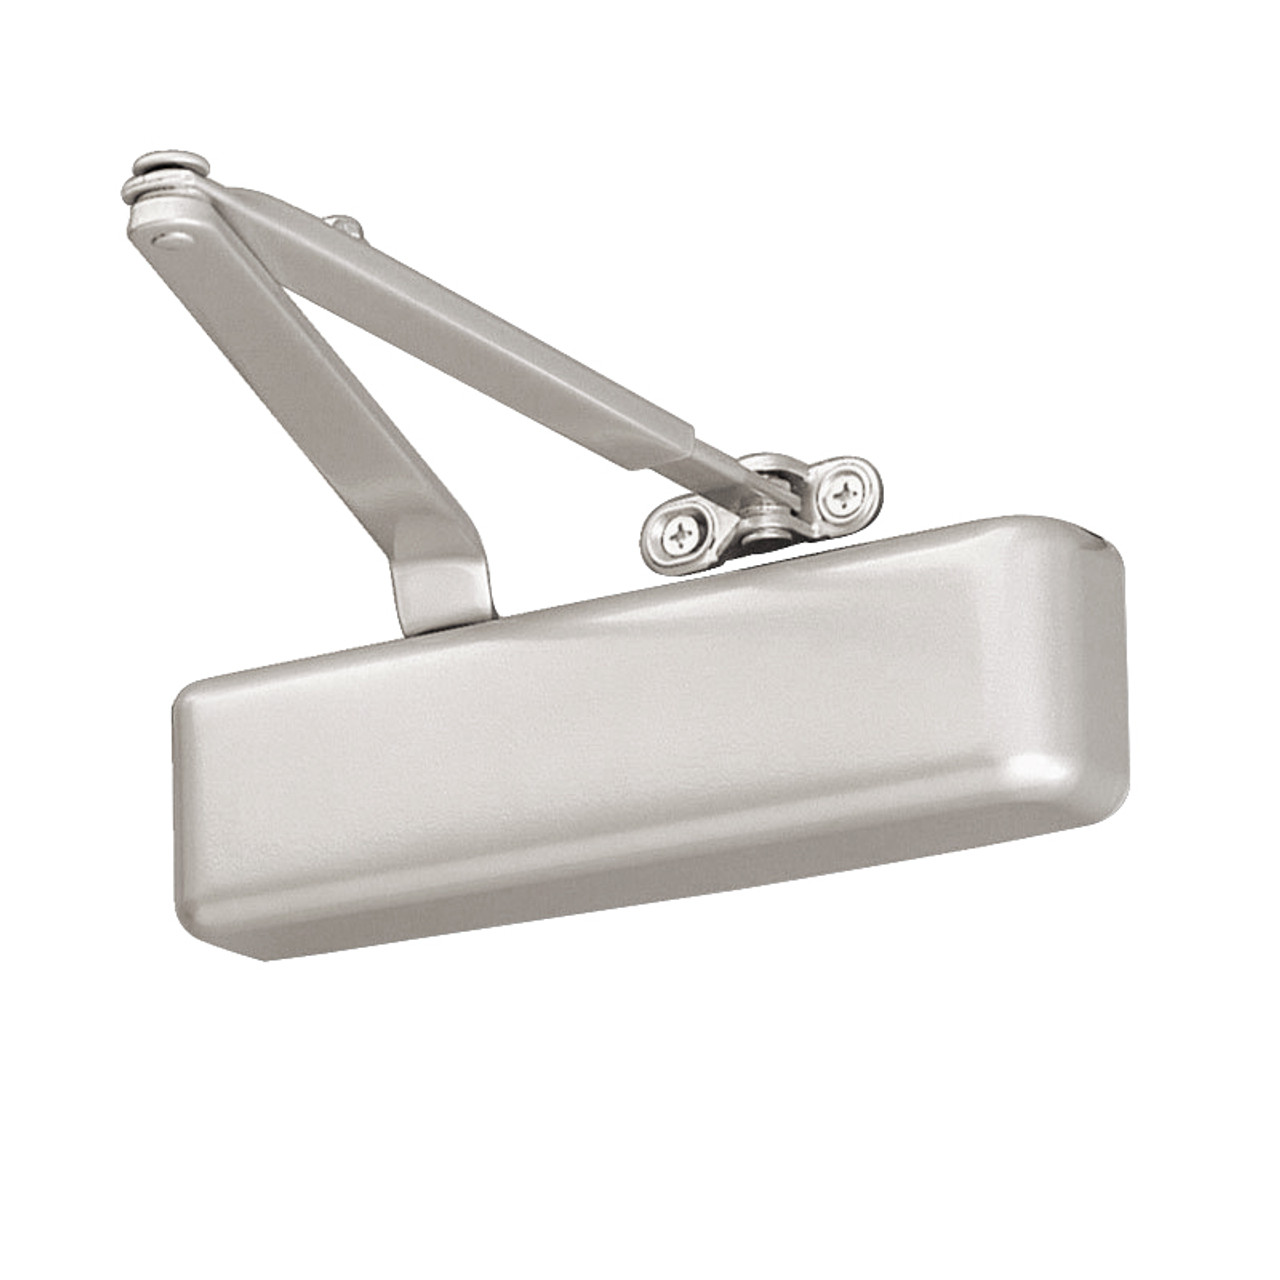 4031-HEDA-LH-US15 LCN Door Closer with Hold Open Extra Duty Arm in Satin Nickel Finish